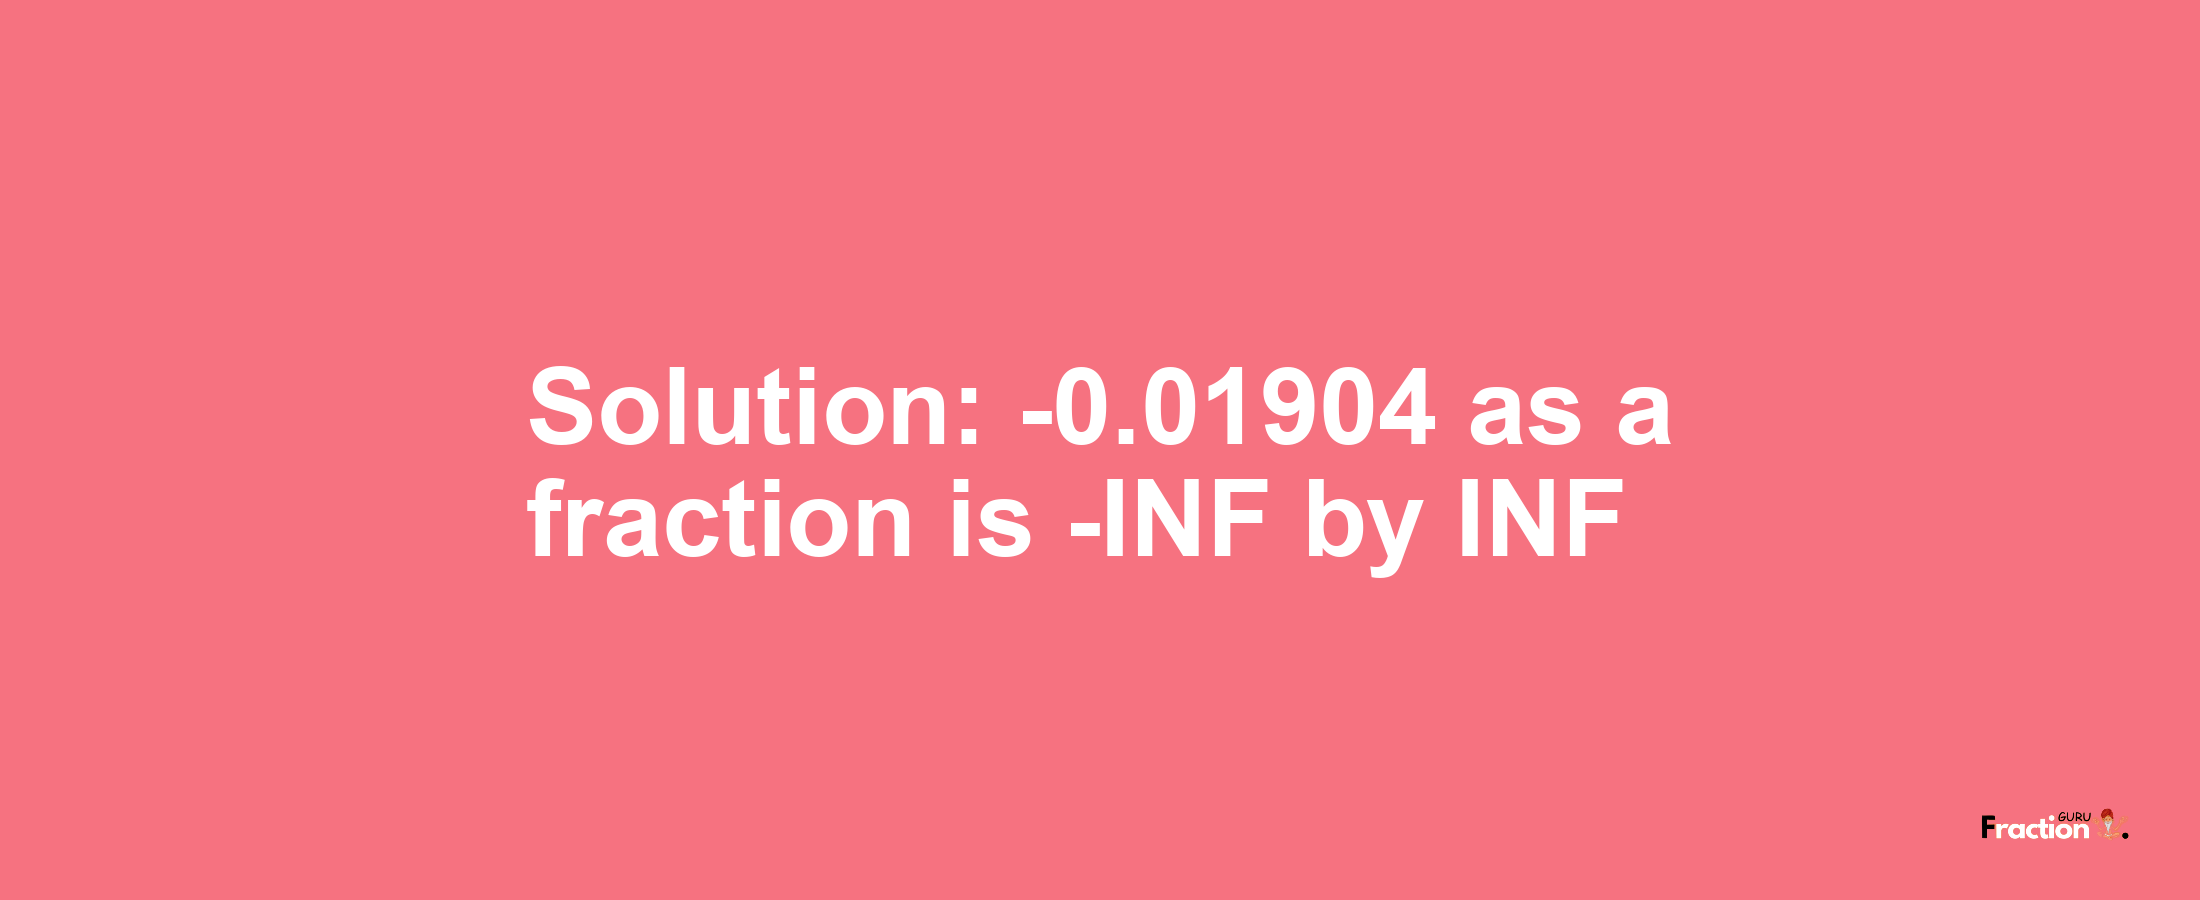 Solution:-0.01904 as a fraction is -INF/INF